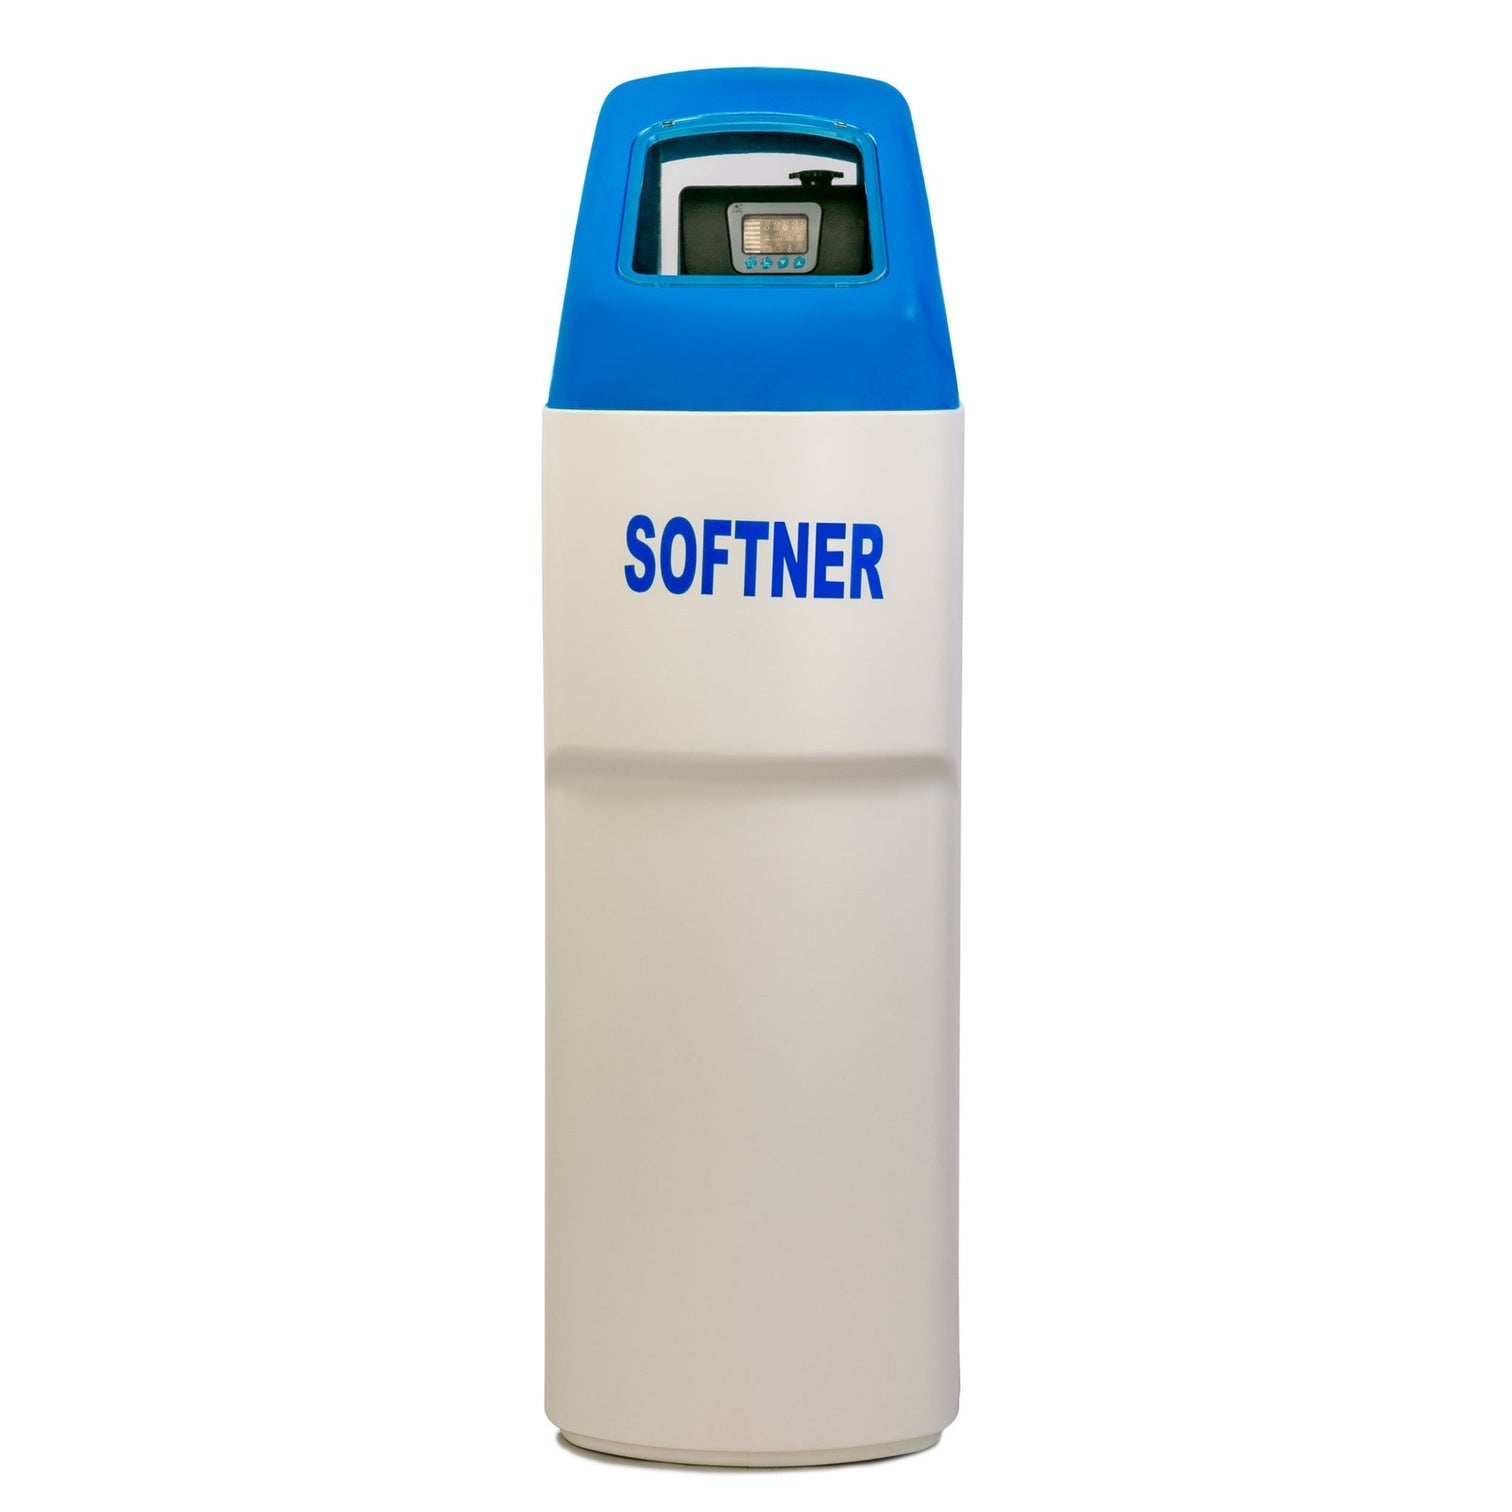 Bepure whole house water softener